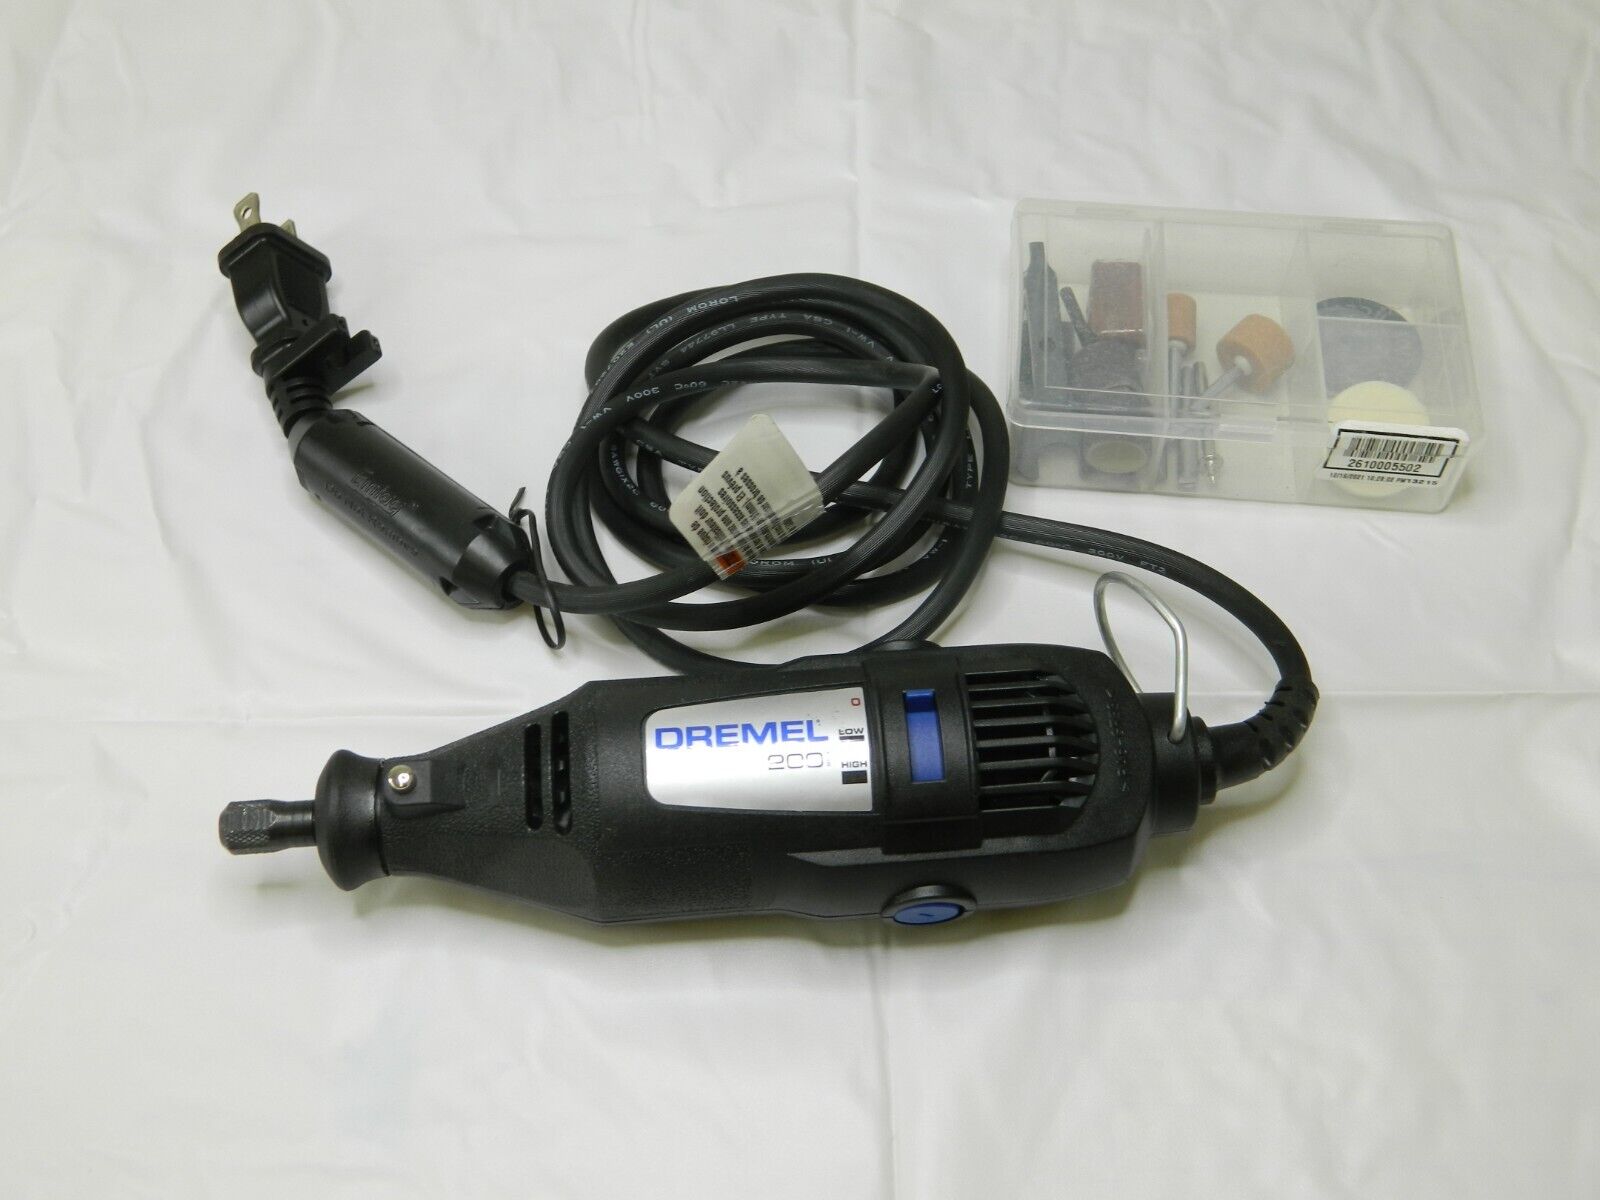 Dremel 200-1/15 Two Speed Rotary Tool Kit with 1 Attachment 15